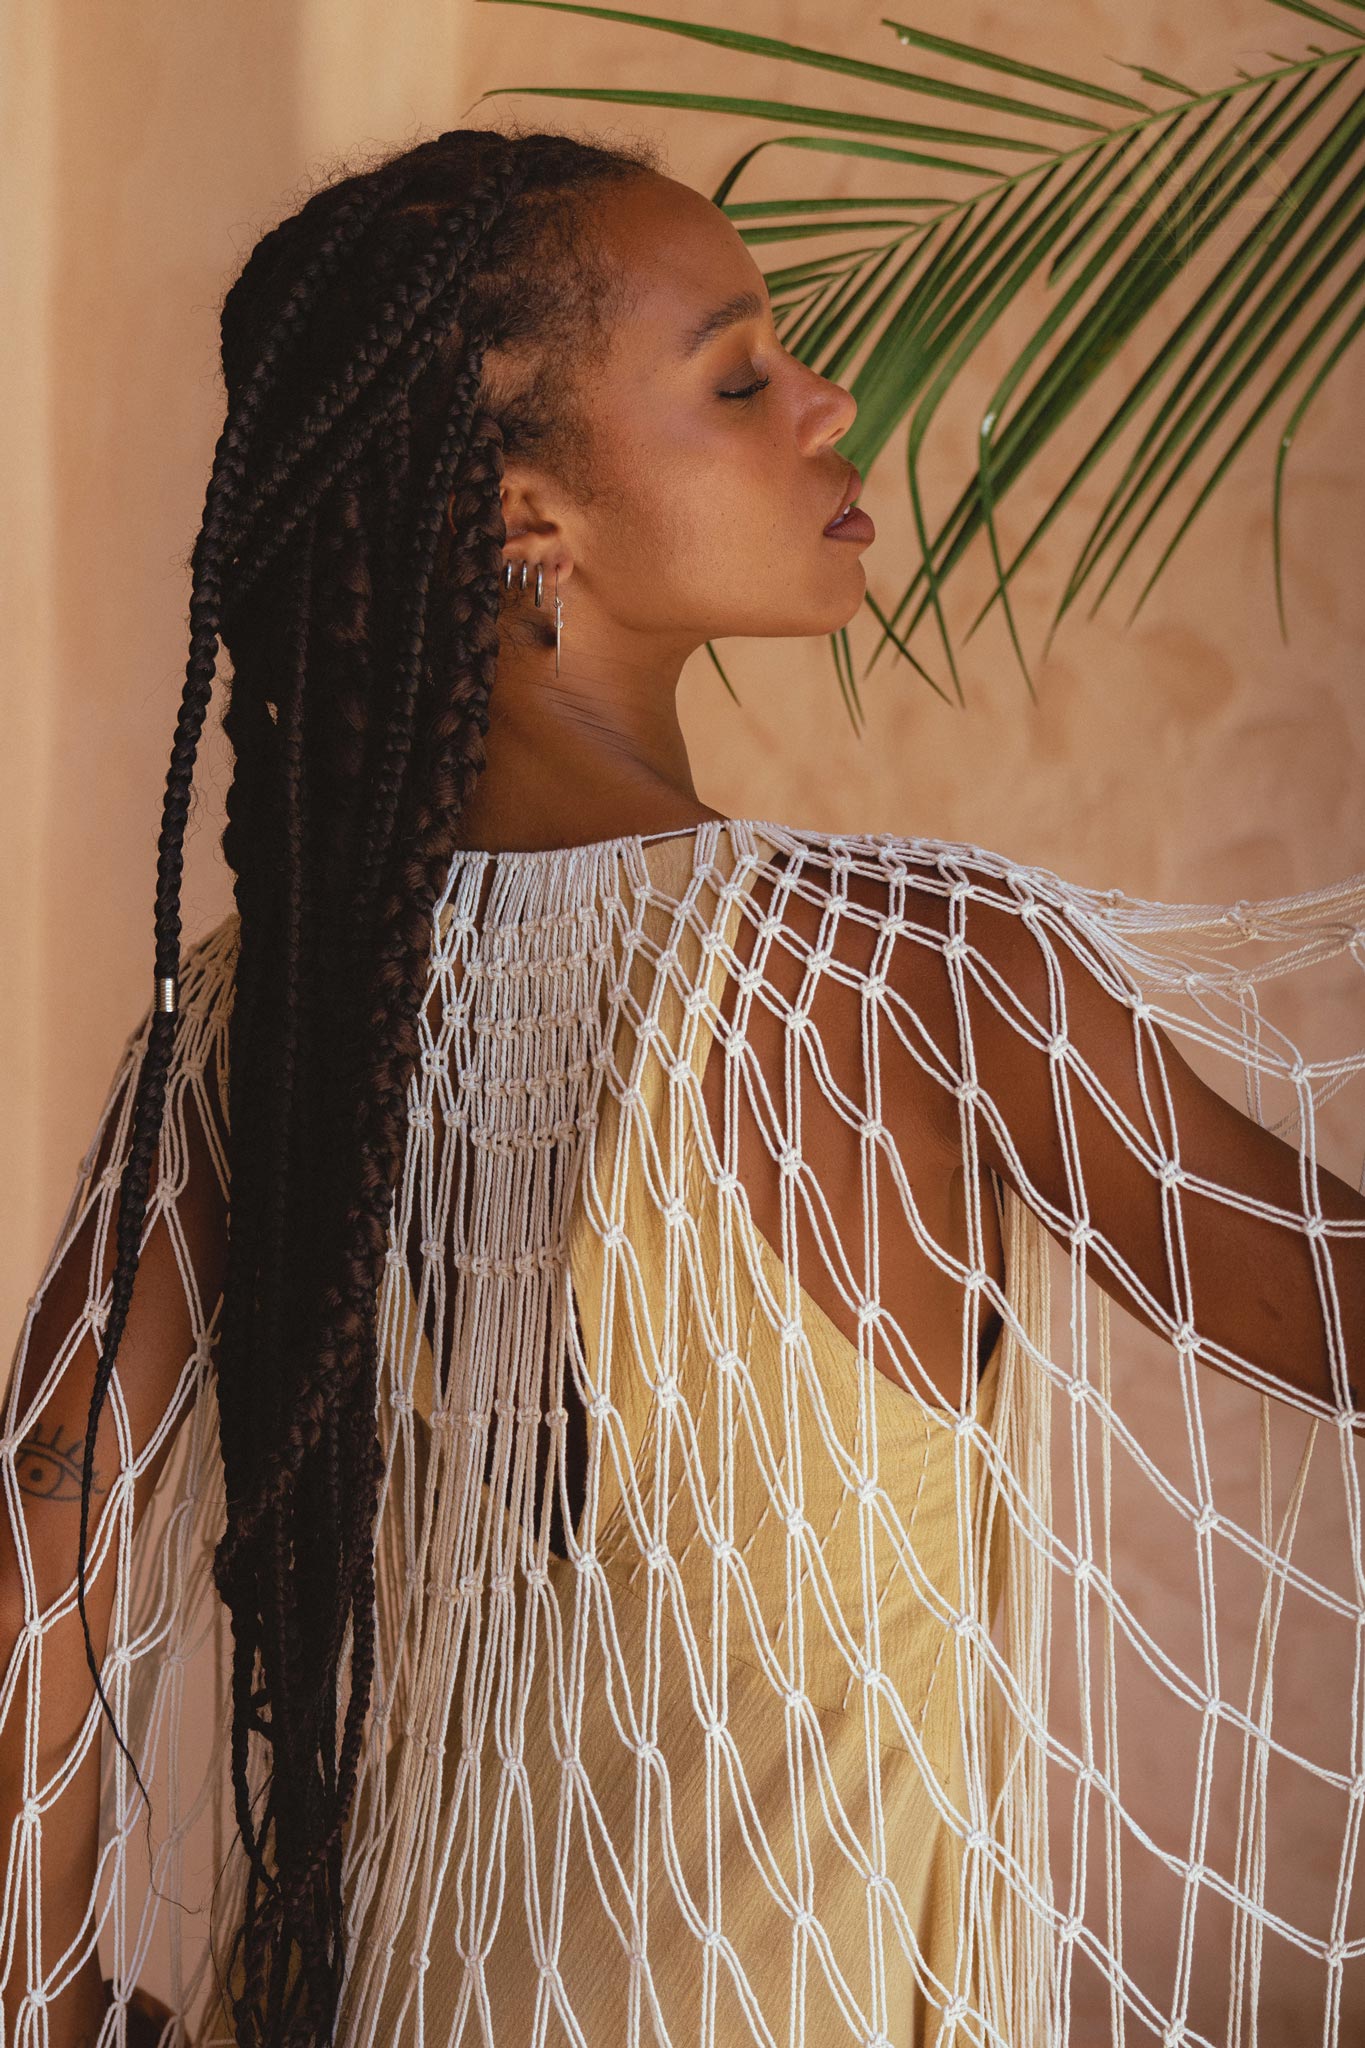 Stay cool and stylish this summer with an Off-White Summer Net Cover Up from Aya Sacred Wear.